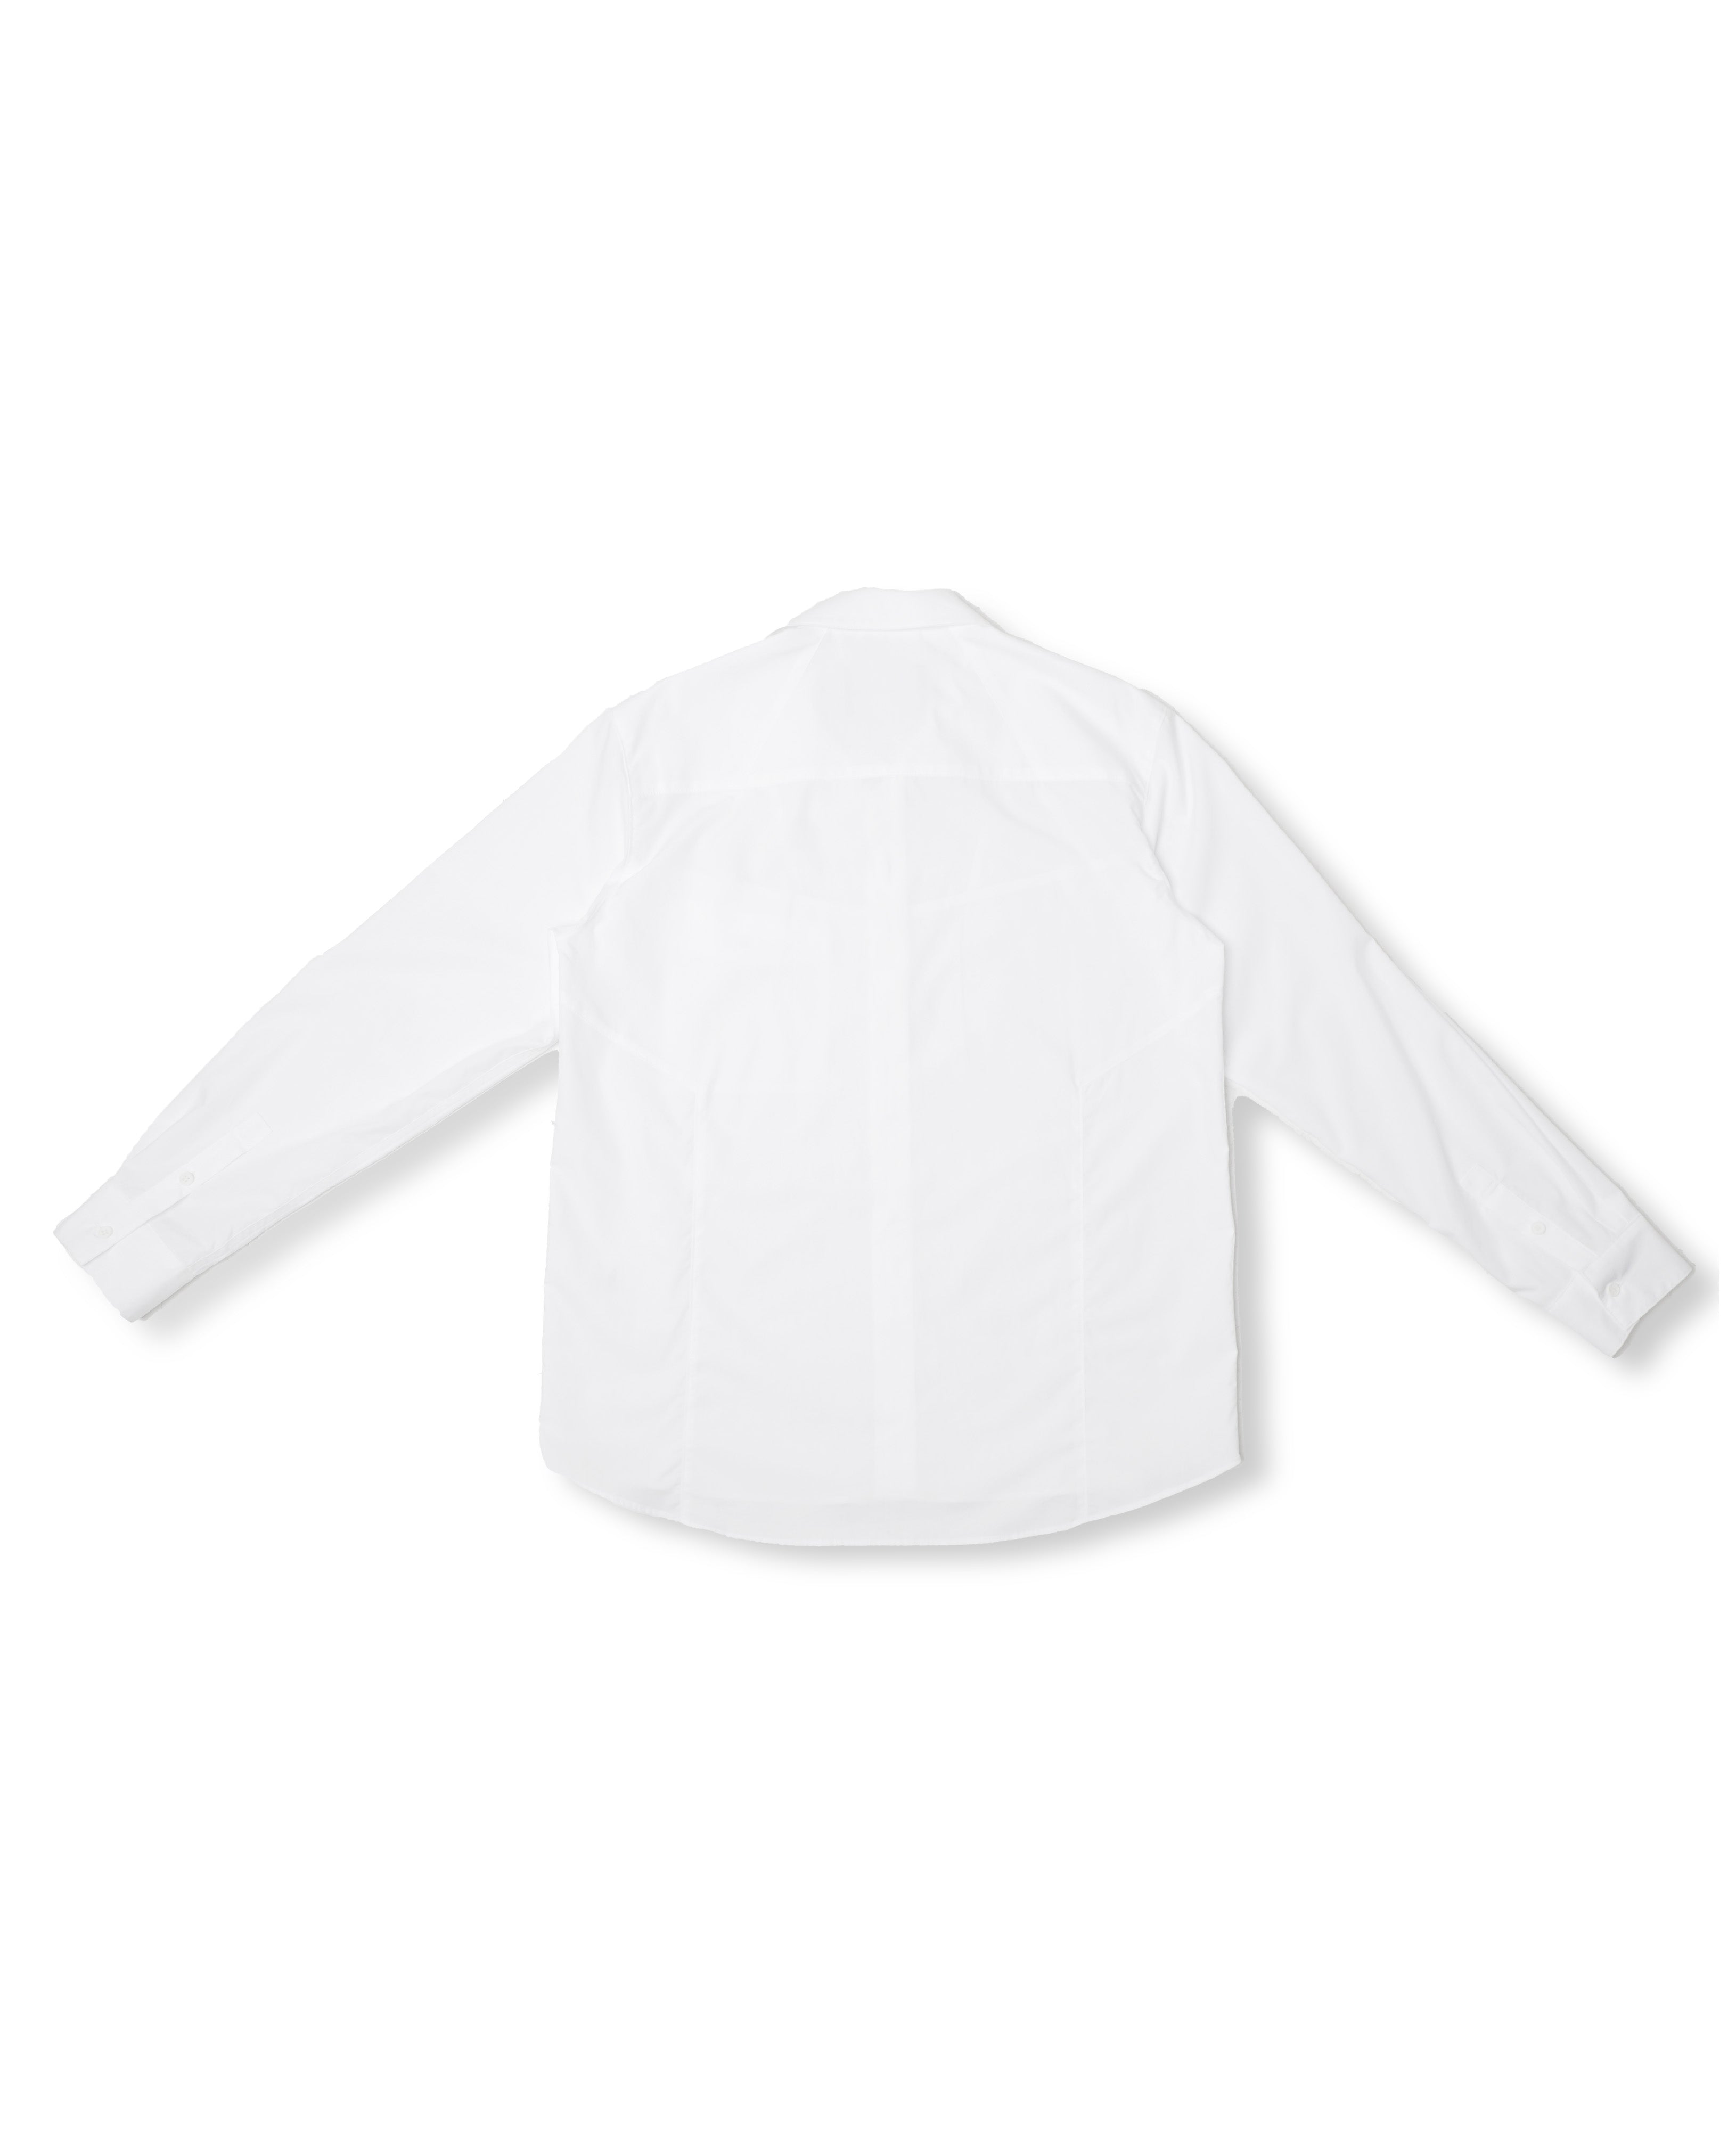 K.A.F PANEL SHIRT IN COTTON WH